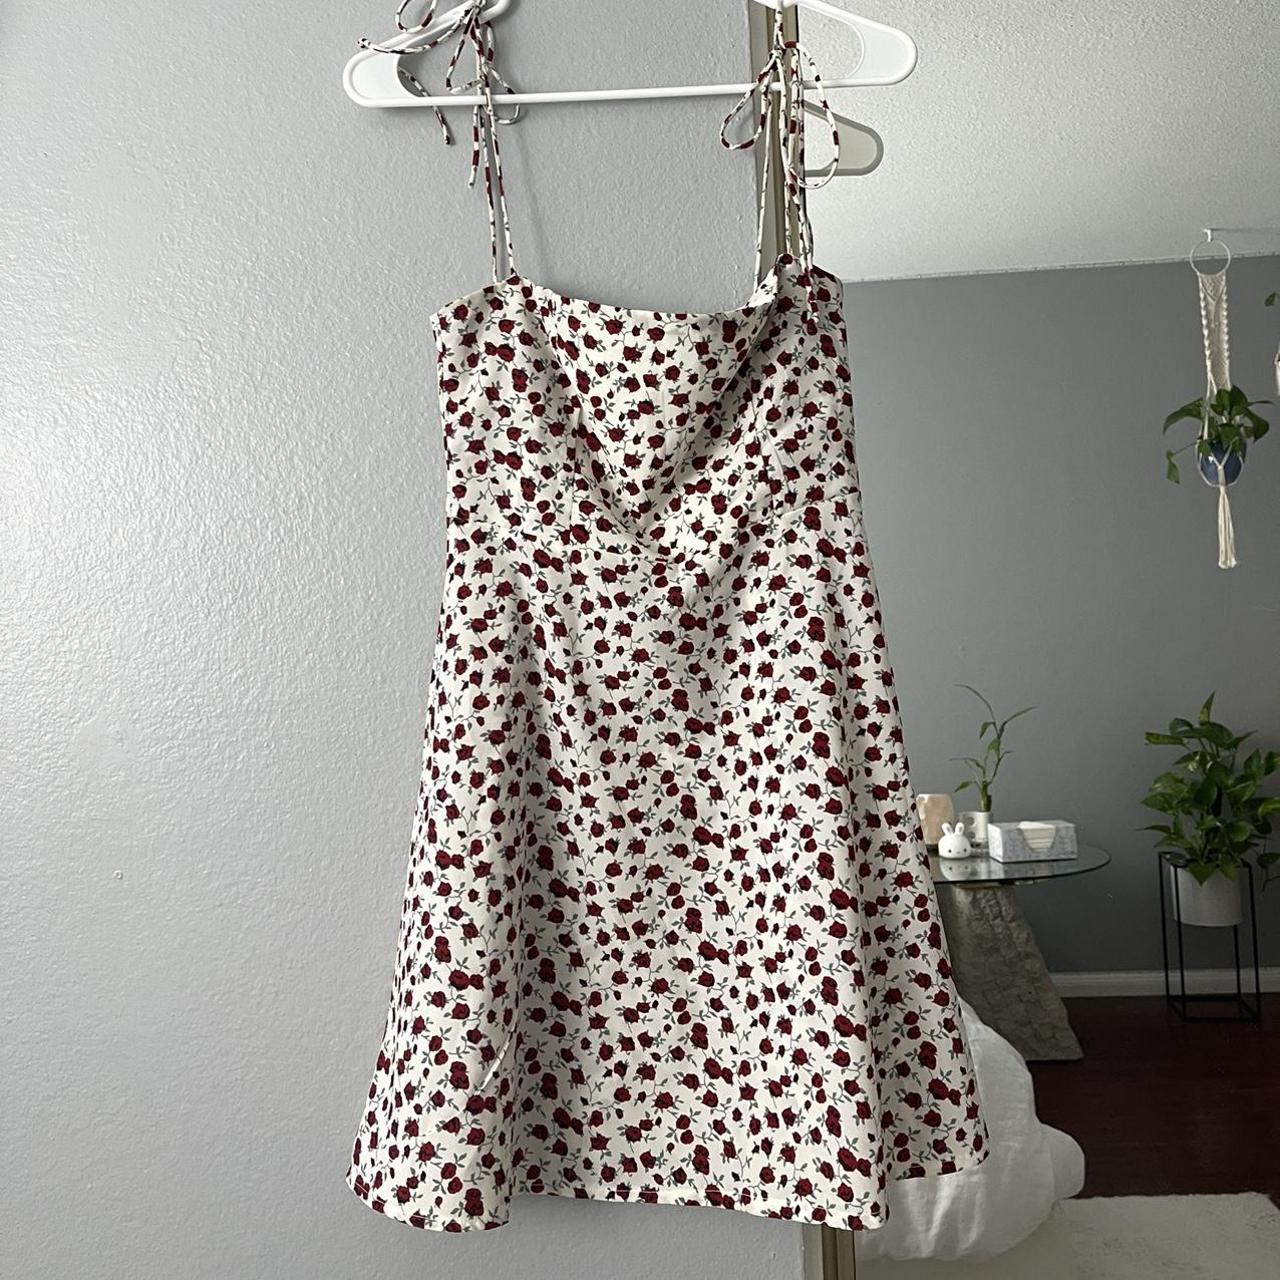 Brandy Melville Women's Red and White Dress | Depop